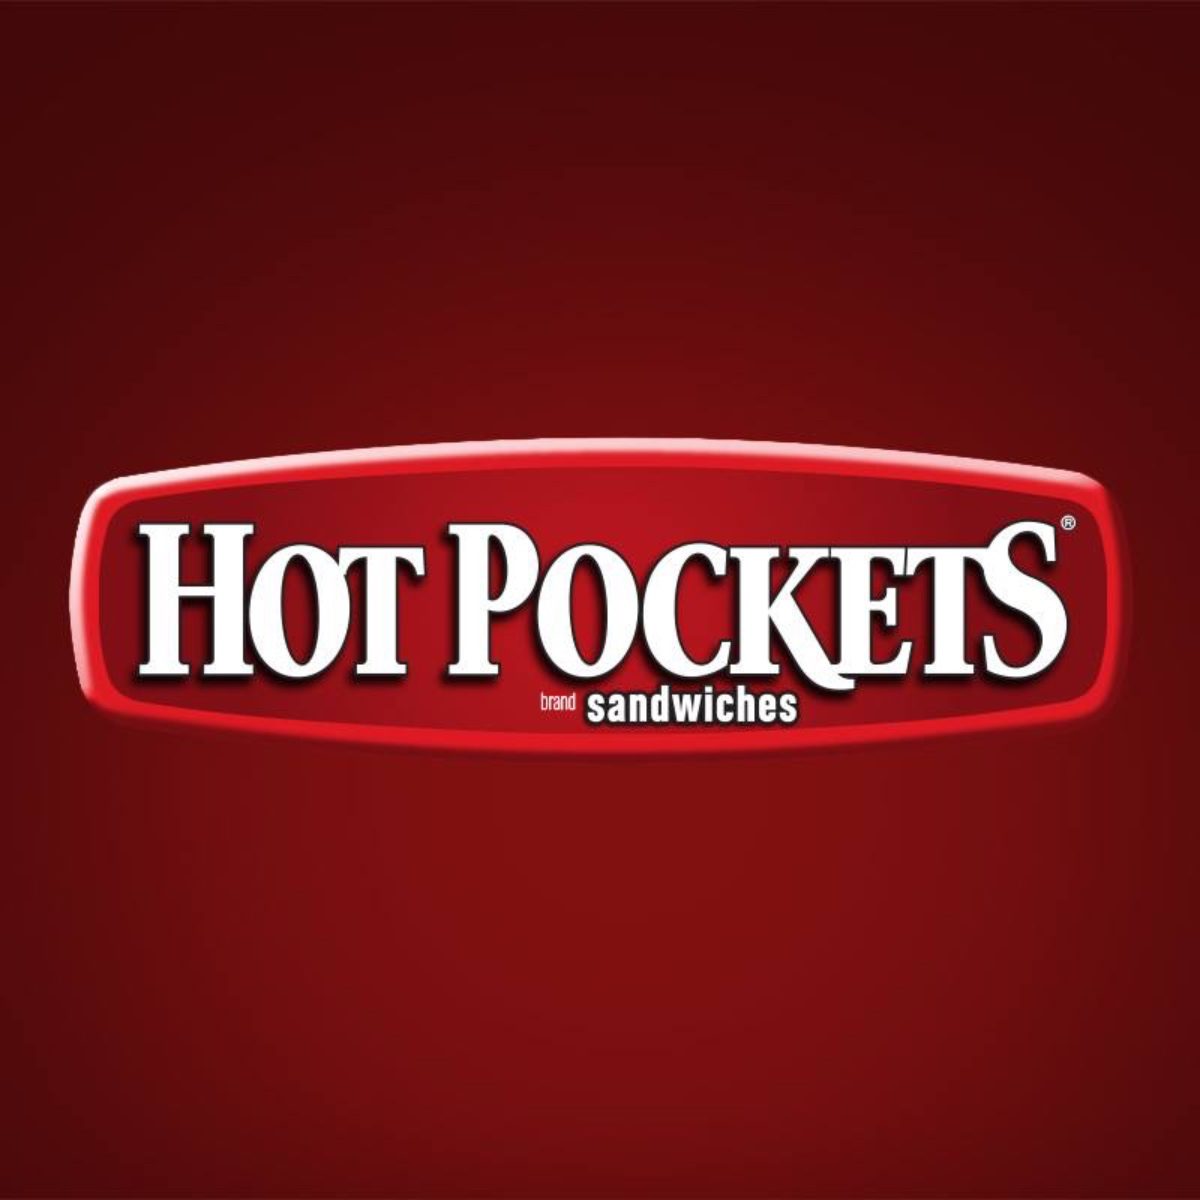 <p><strong><a class="SWhtmlLink" href="https://www.hotpockets.com" rel="noopener">Hot Pockets</a>, Mount Sterling</strong></p> <p>Everyone's favorite handheld snack is made in the Nestle factory located in Mount Sterling, Kentucky. Did you know that little cardboard packet that comes with each Hot Pocket concentrates the microwave's heat, making a crispy crust that tastes oven-baked?</p>